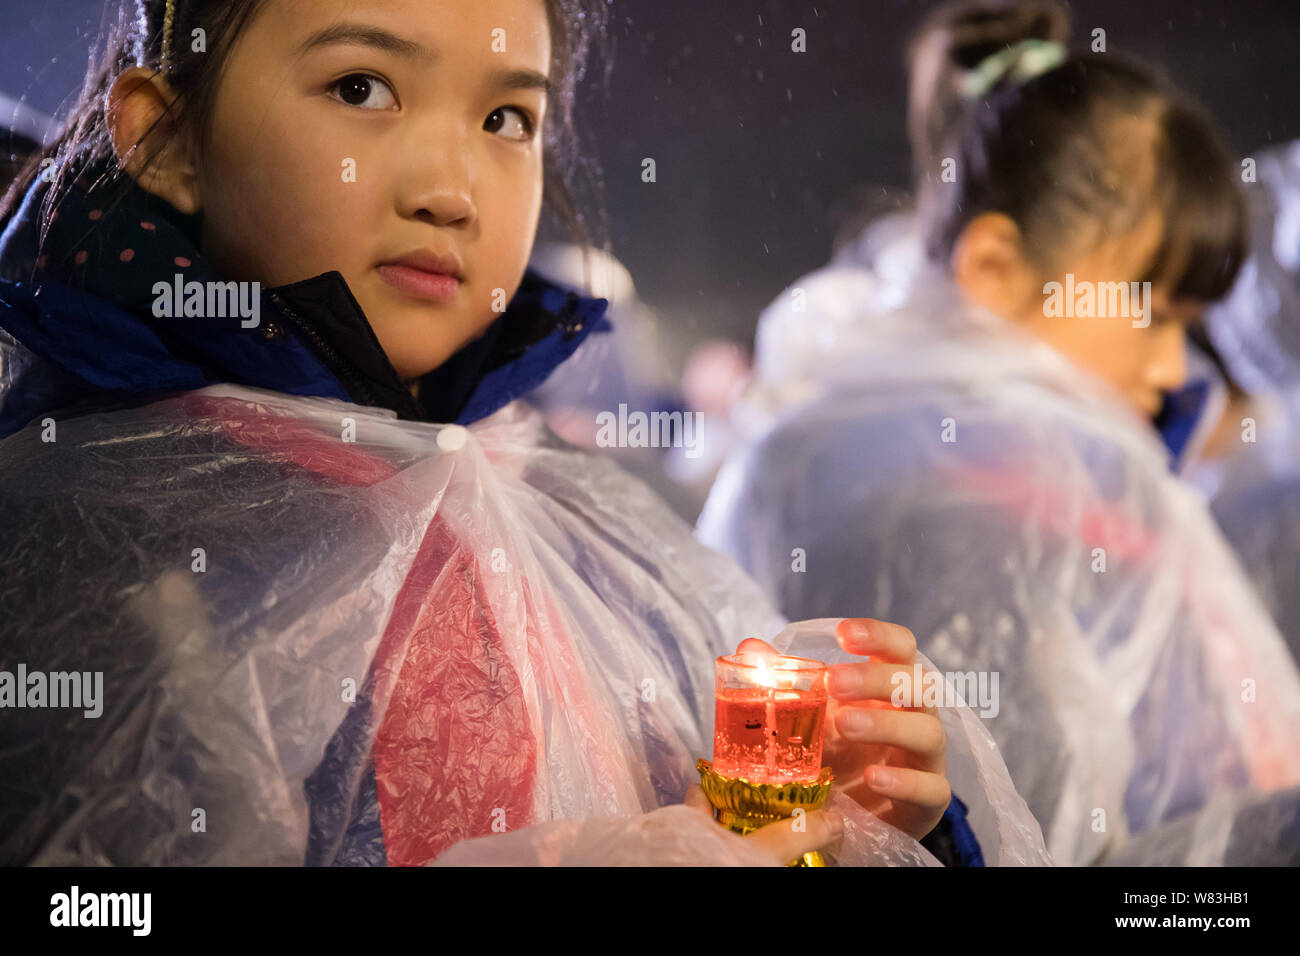 young-girls-hold-candles-in-the-rain-during-a-candlelight-vigil-to-mourn-the-victims-of-the-nanjing-massacre-at-the-memorial-hall-of-the-victims-in-na-W83HB1.jpg